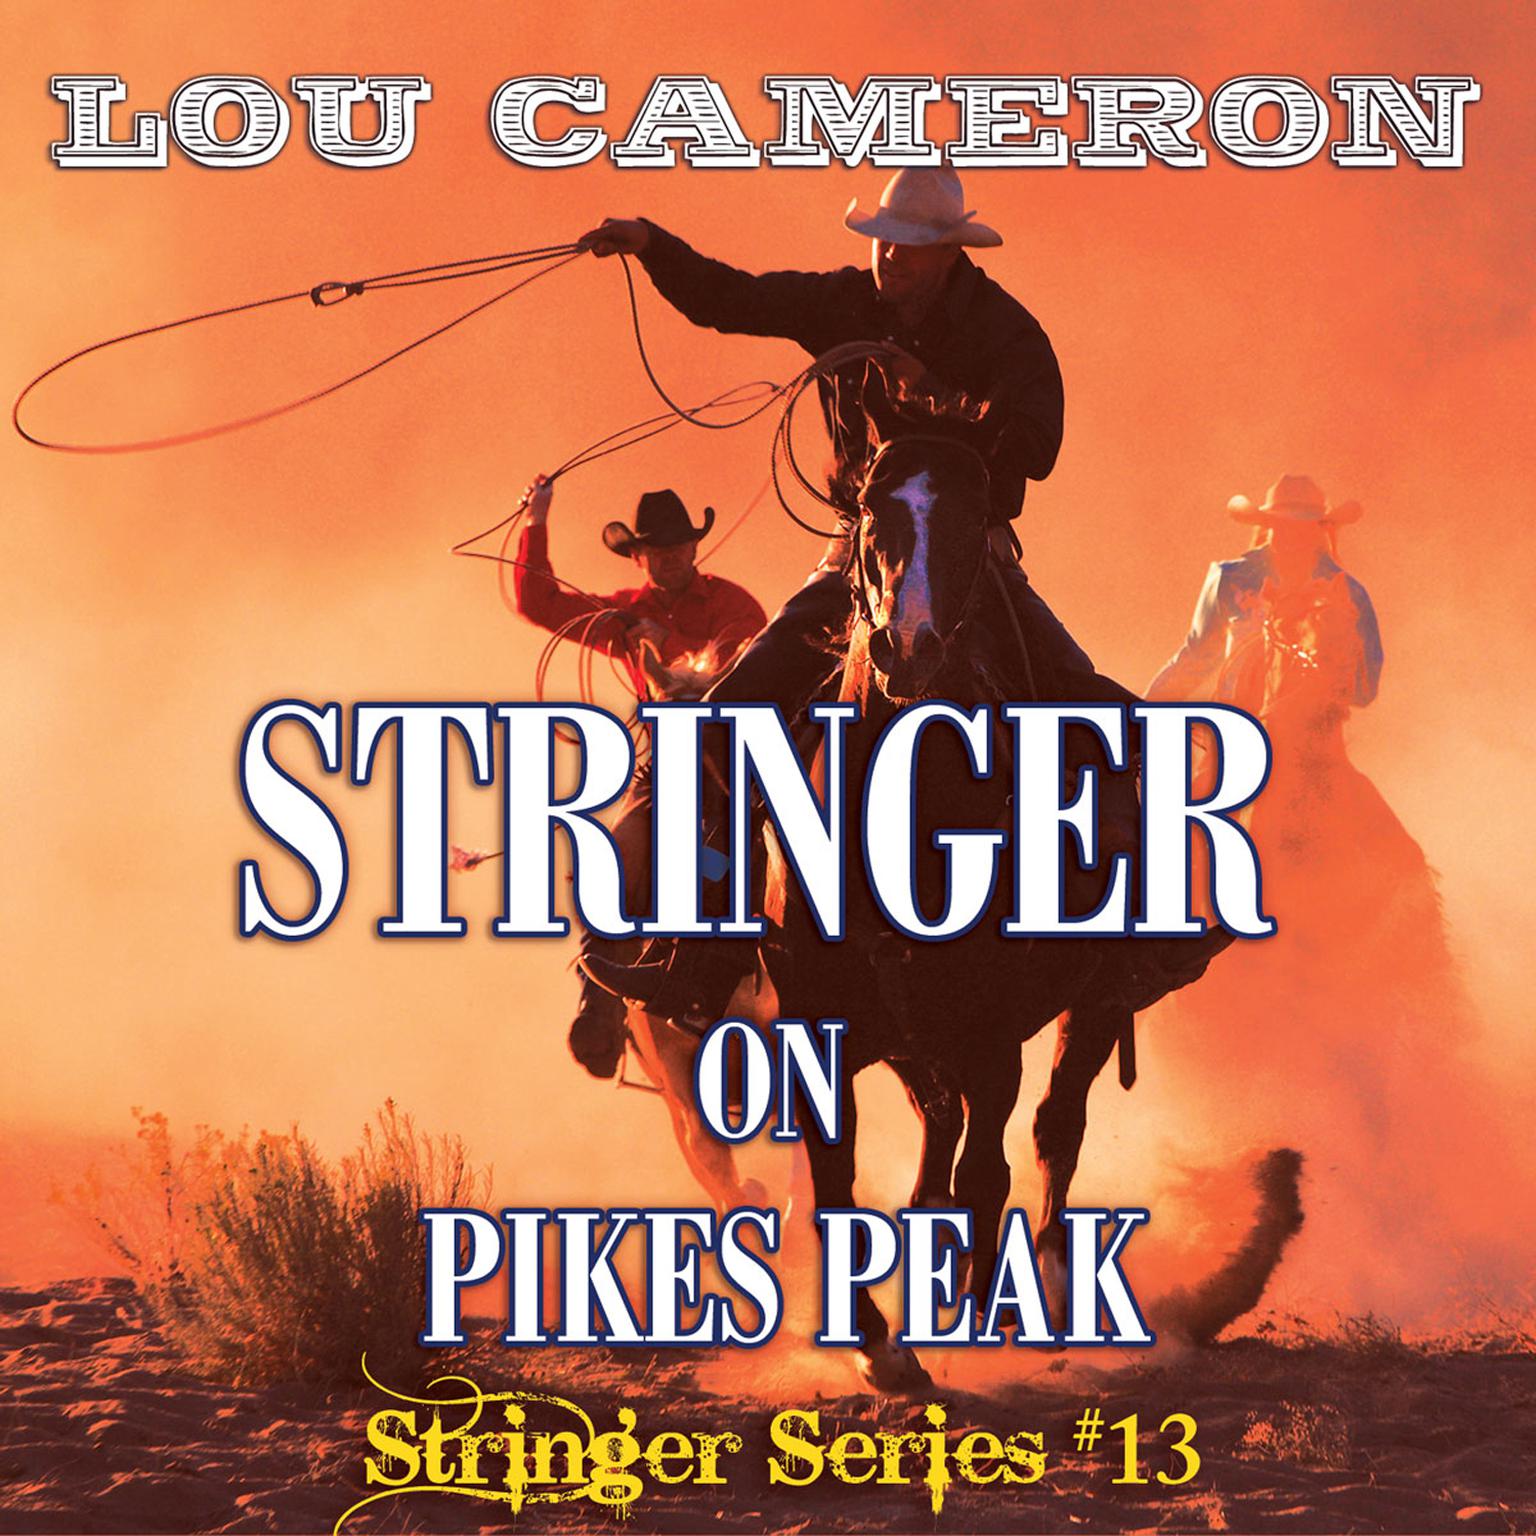 Stringer on Pikes Peak Audiobook, by Lou Cameron